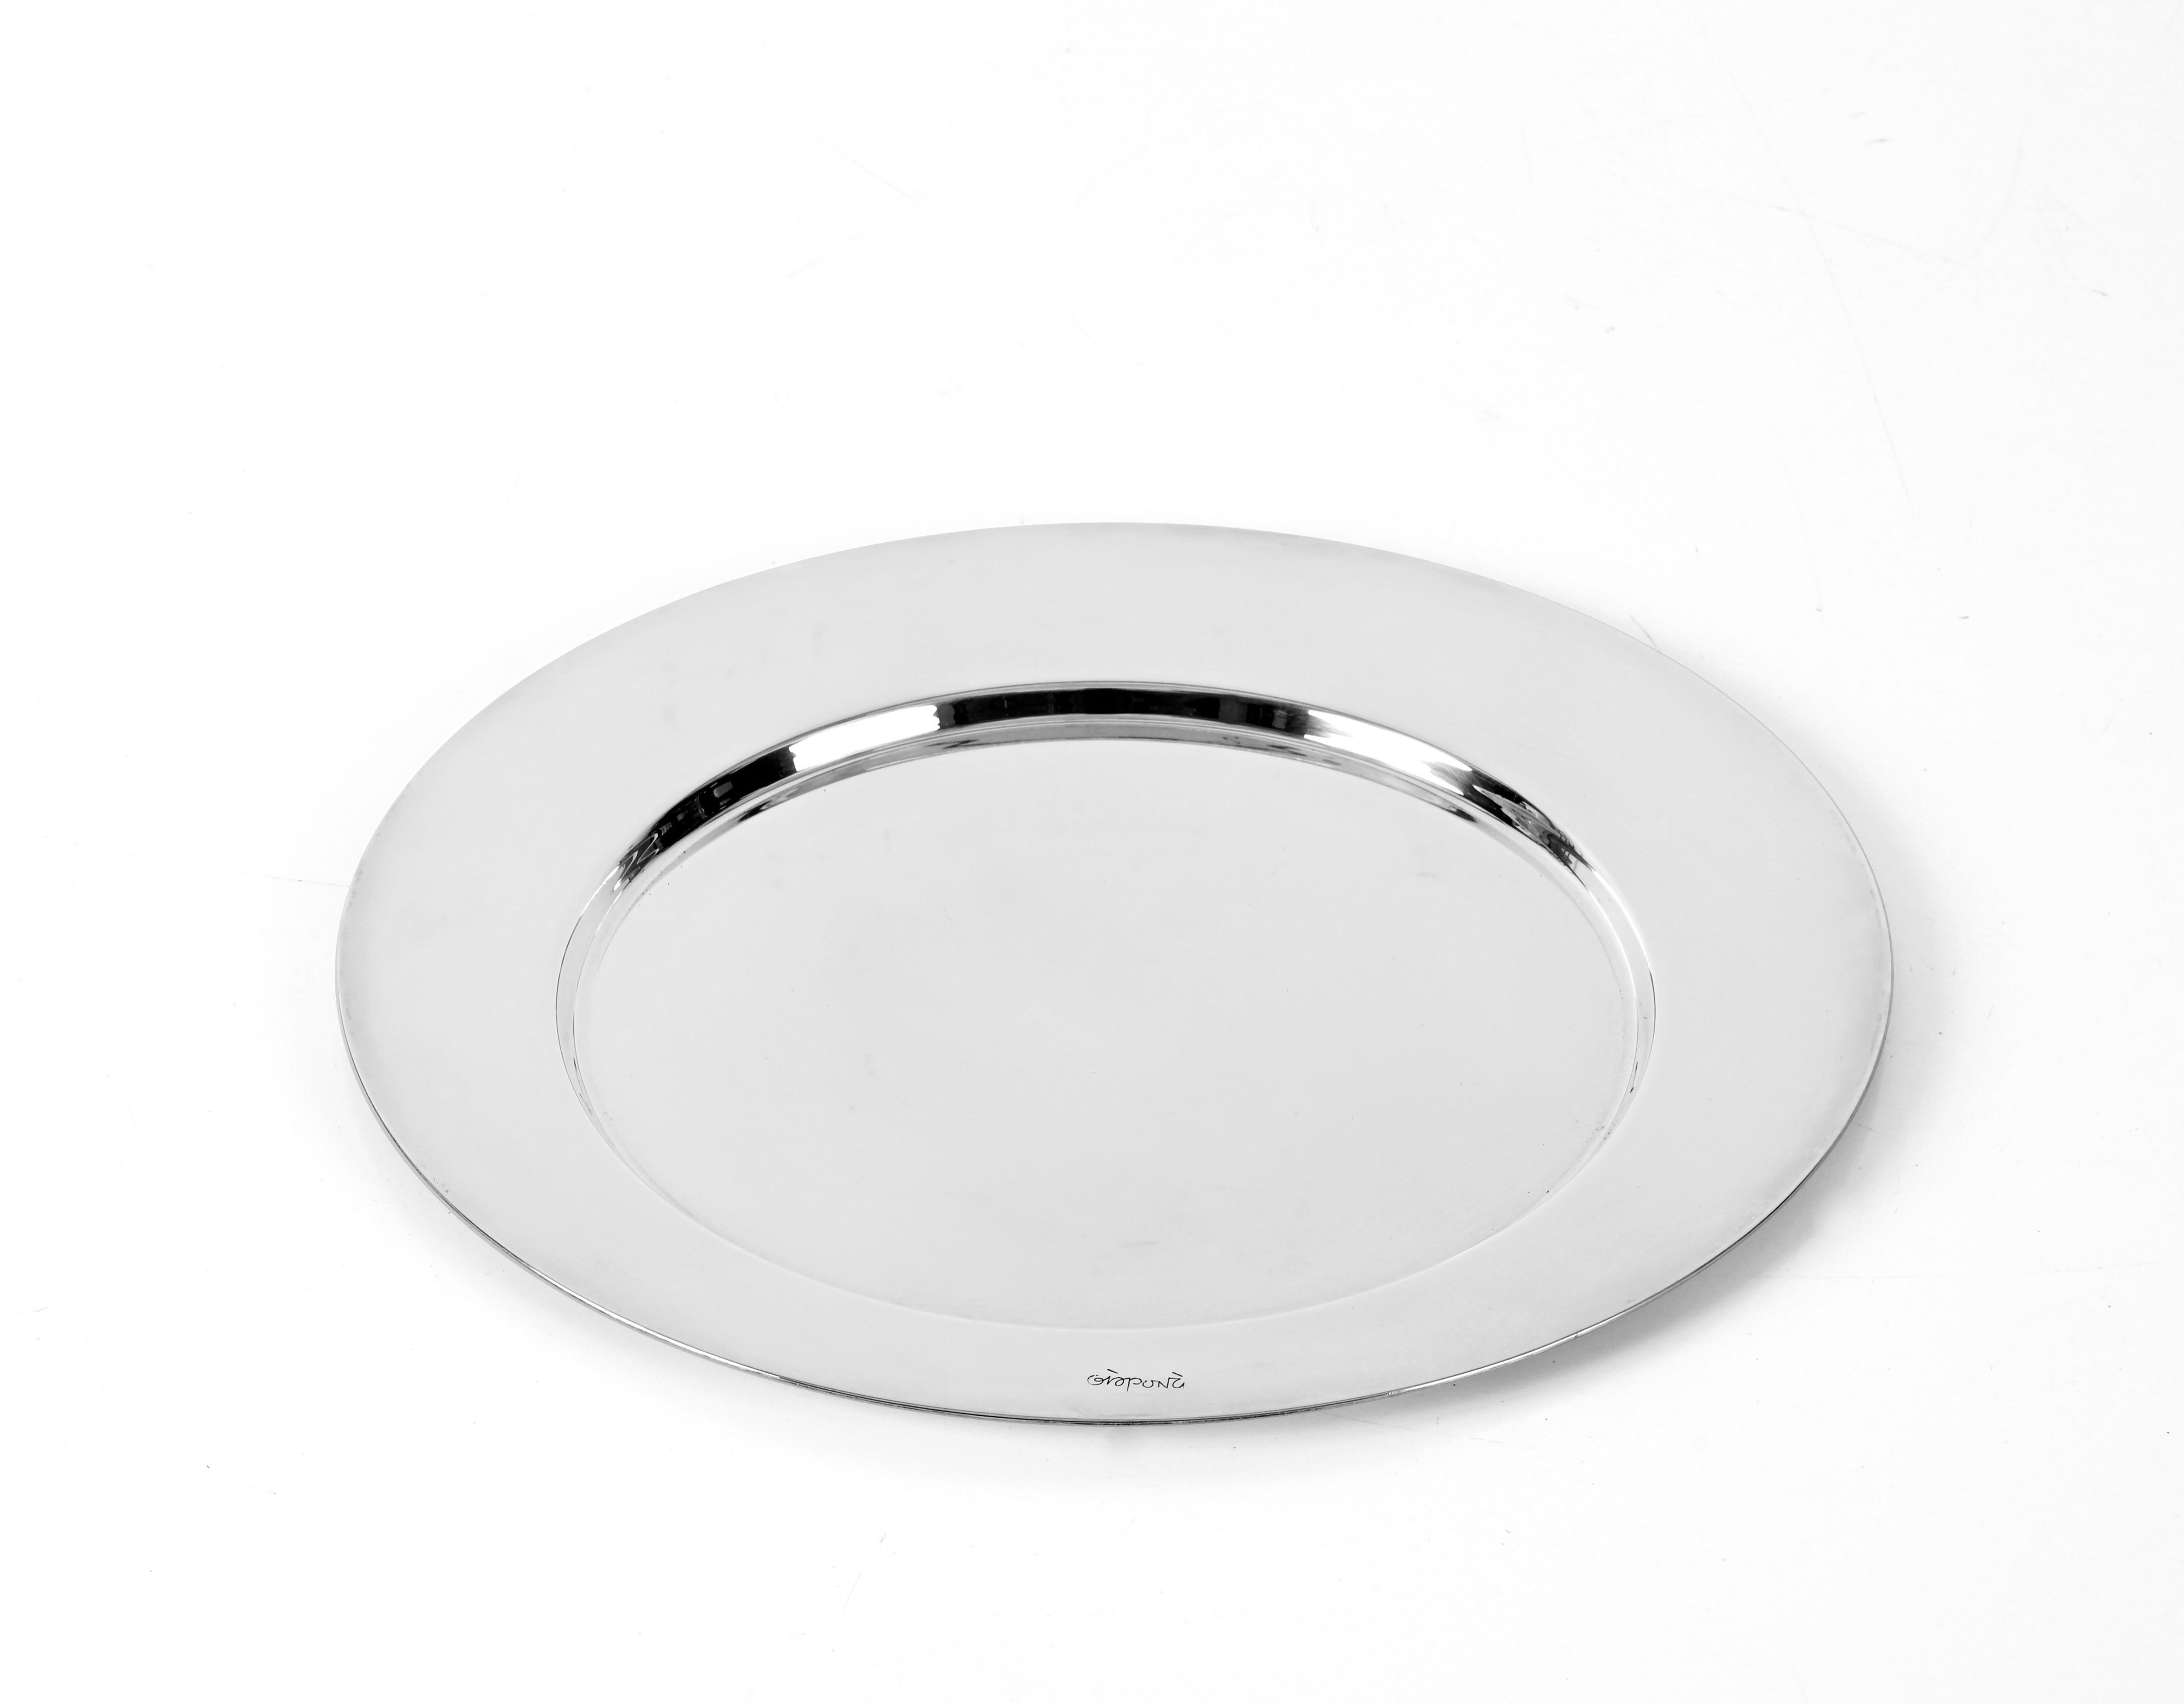 Gio Ponti for Cleto Munari Modernist Silver Plated Serving Plate Italy, 1980s For Sale 5